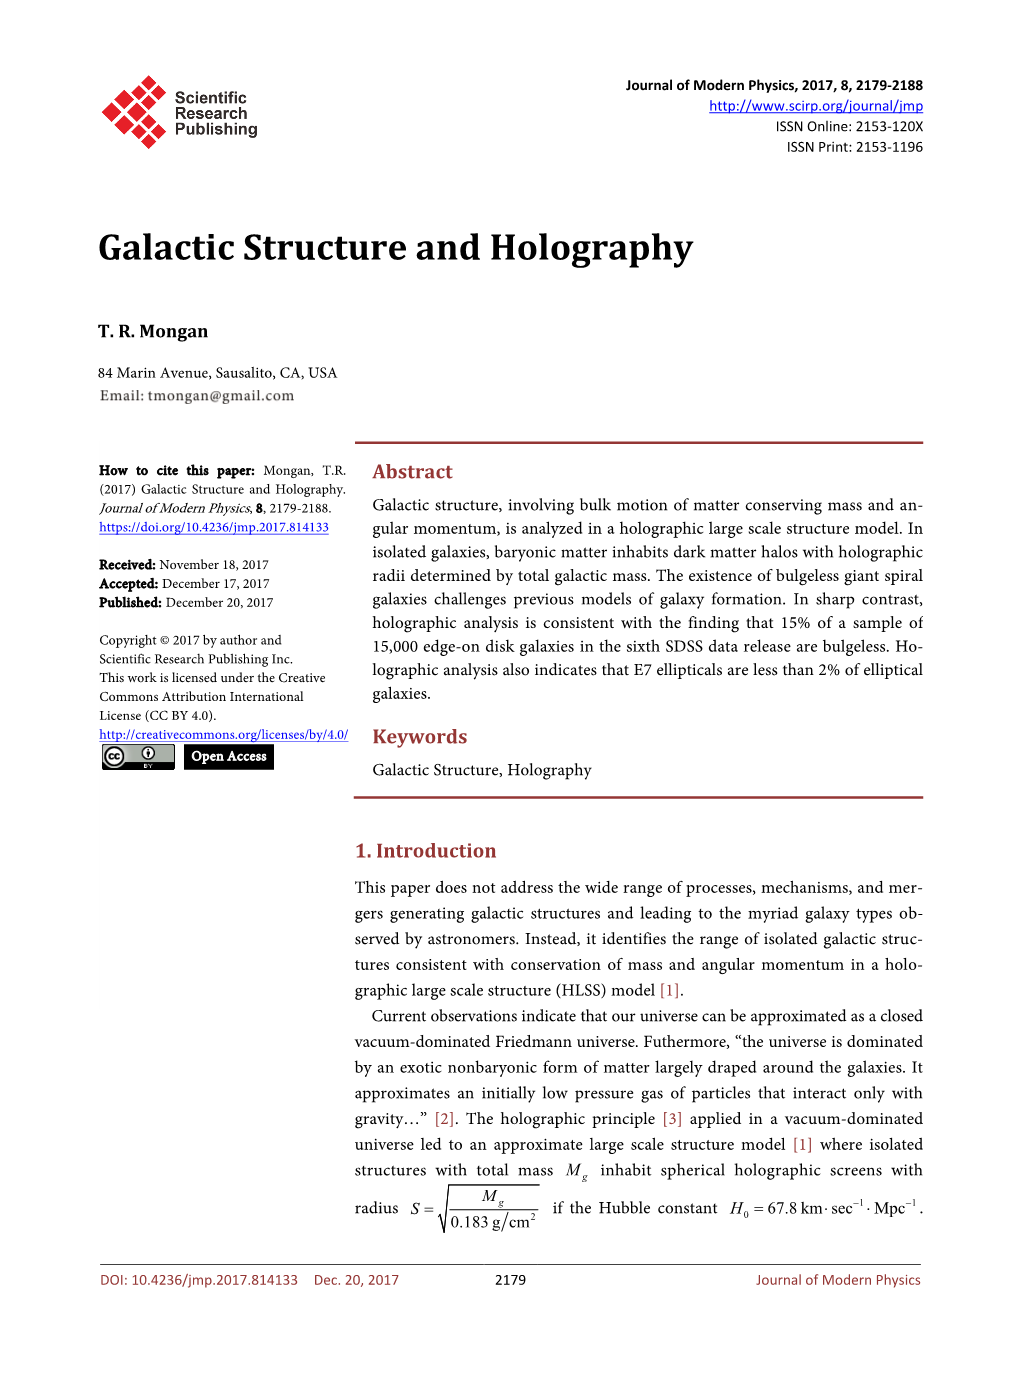 Galactic Structure and Holography